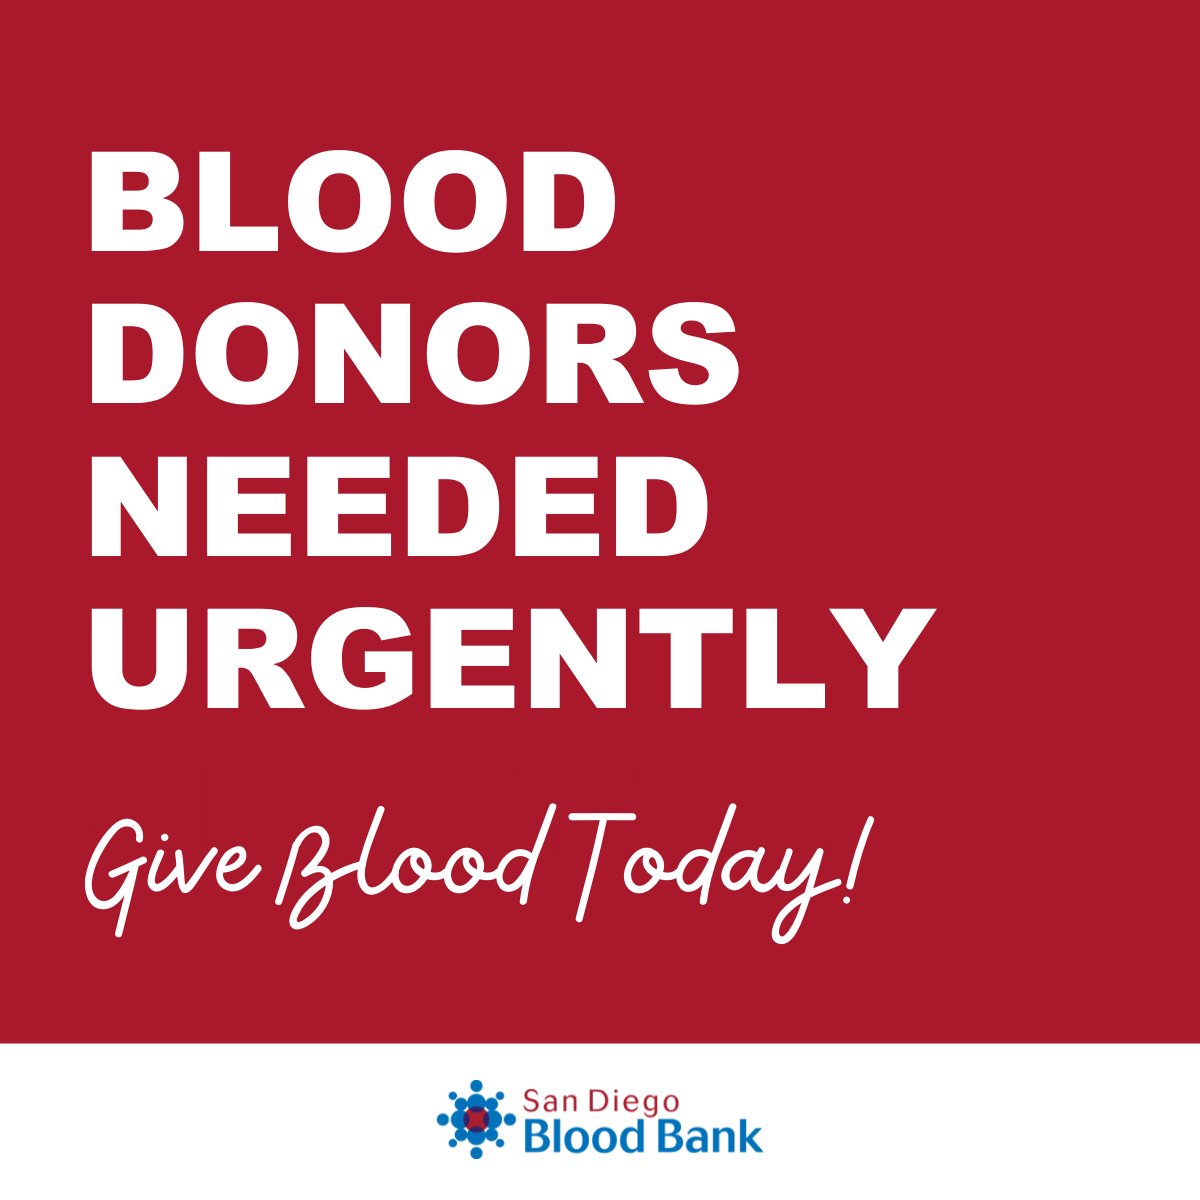 🚨Calling all #BloodDonors! There is an urgent need for all blood types, especially O! The community thrives when you #GiveBlood. Be a hero & book an appt by calling (619) 400-8251 or visit sandiegobloodbank.org/donate. 💪🩸🅾️ #SavingLivesTogether #SDBloodBank